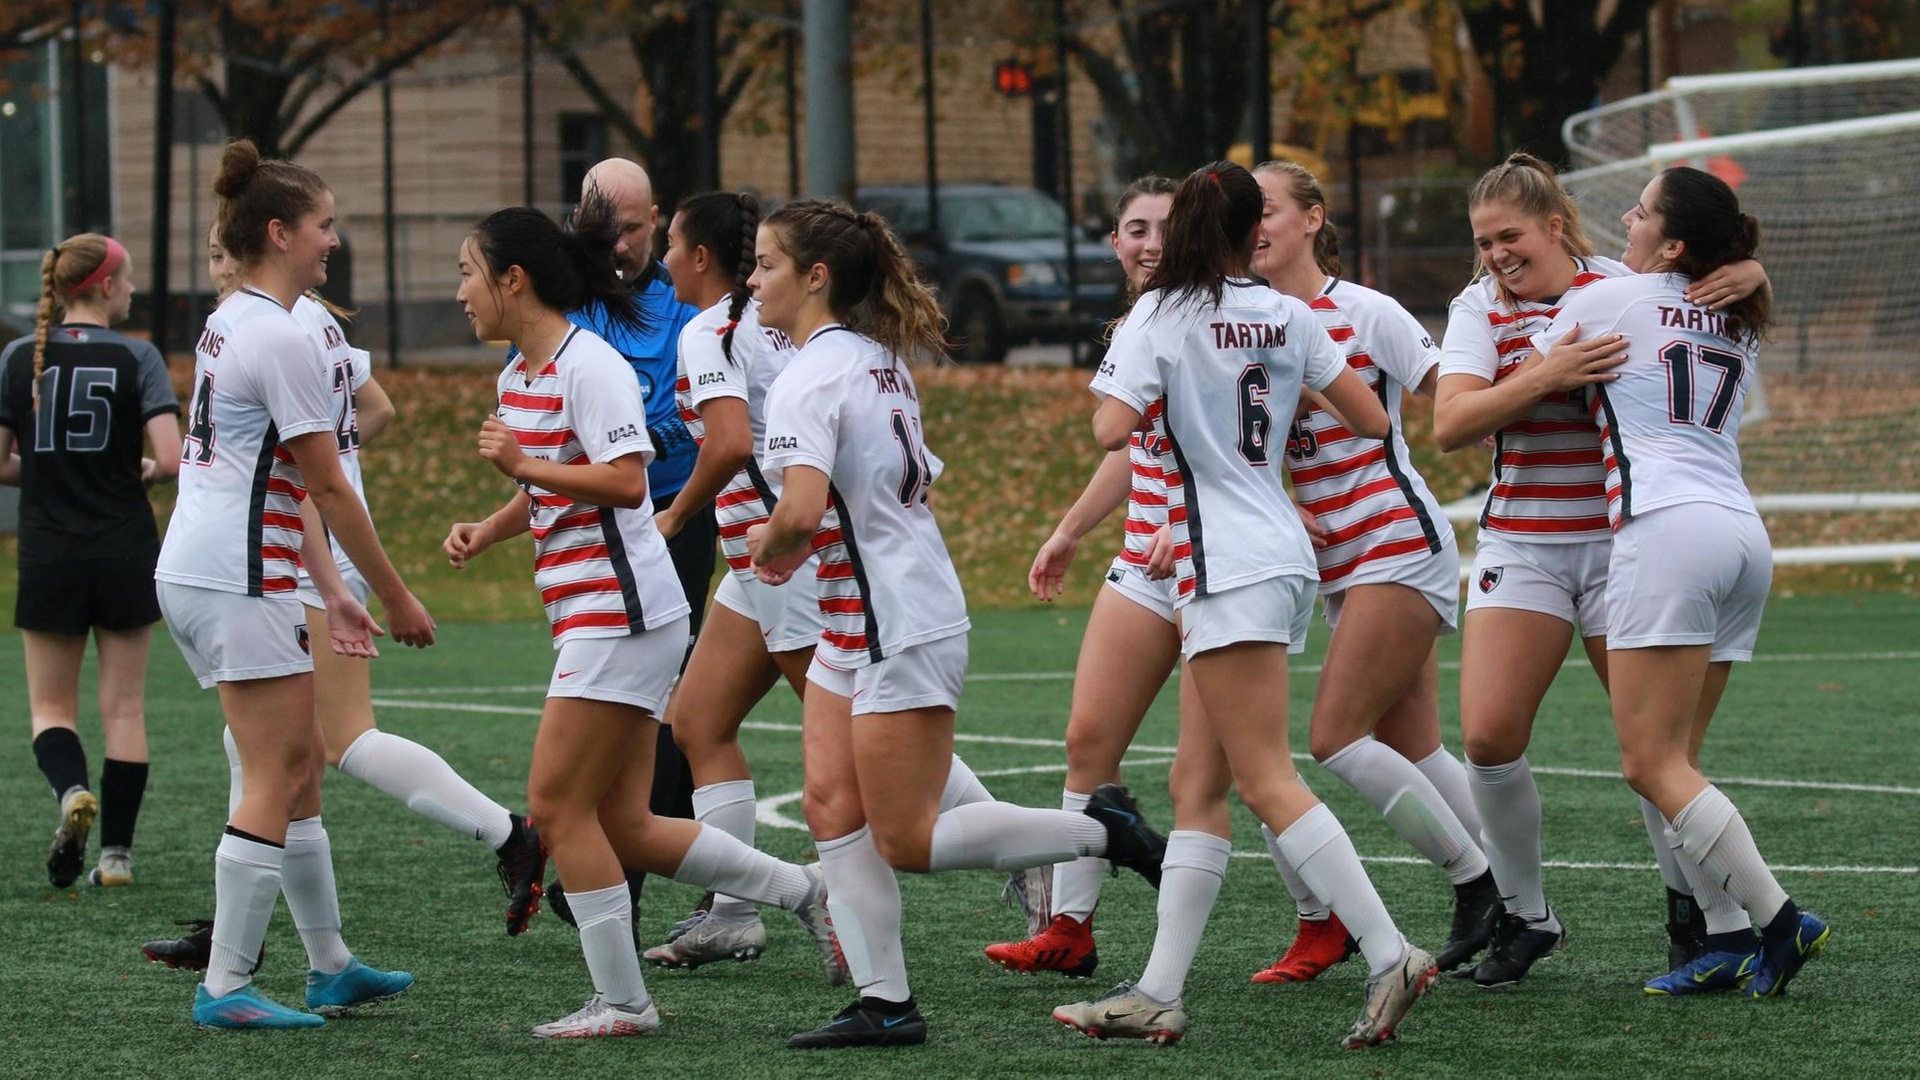 women's soccer players wearing white uniforms smiling together after scoring a goal